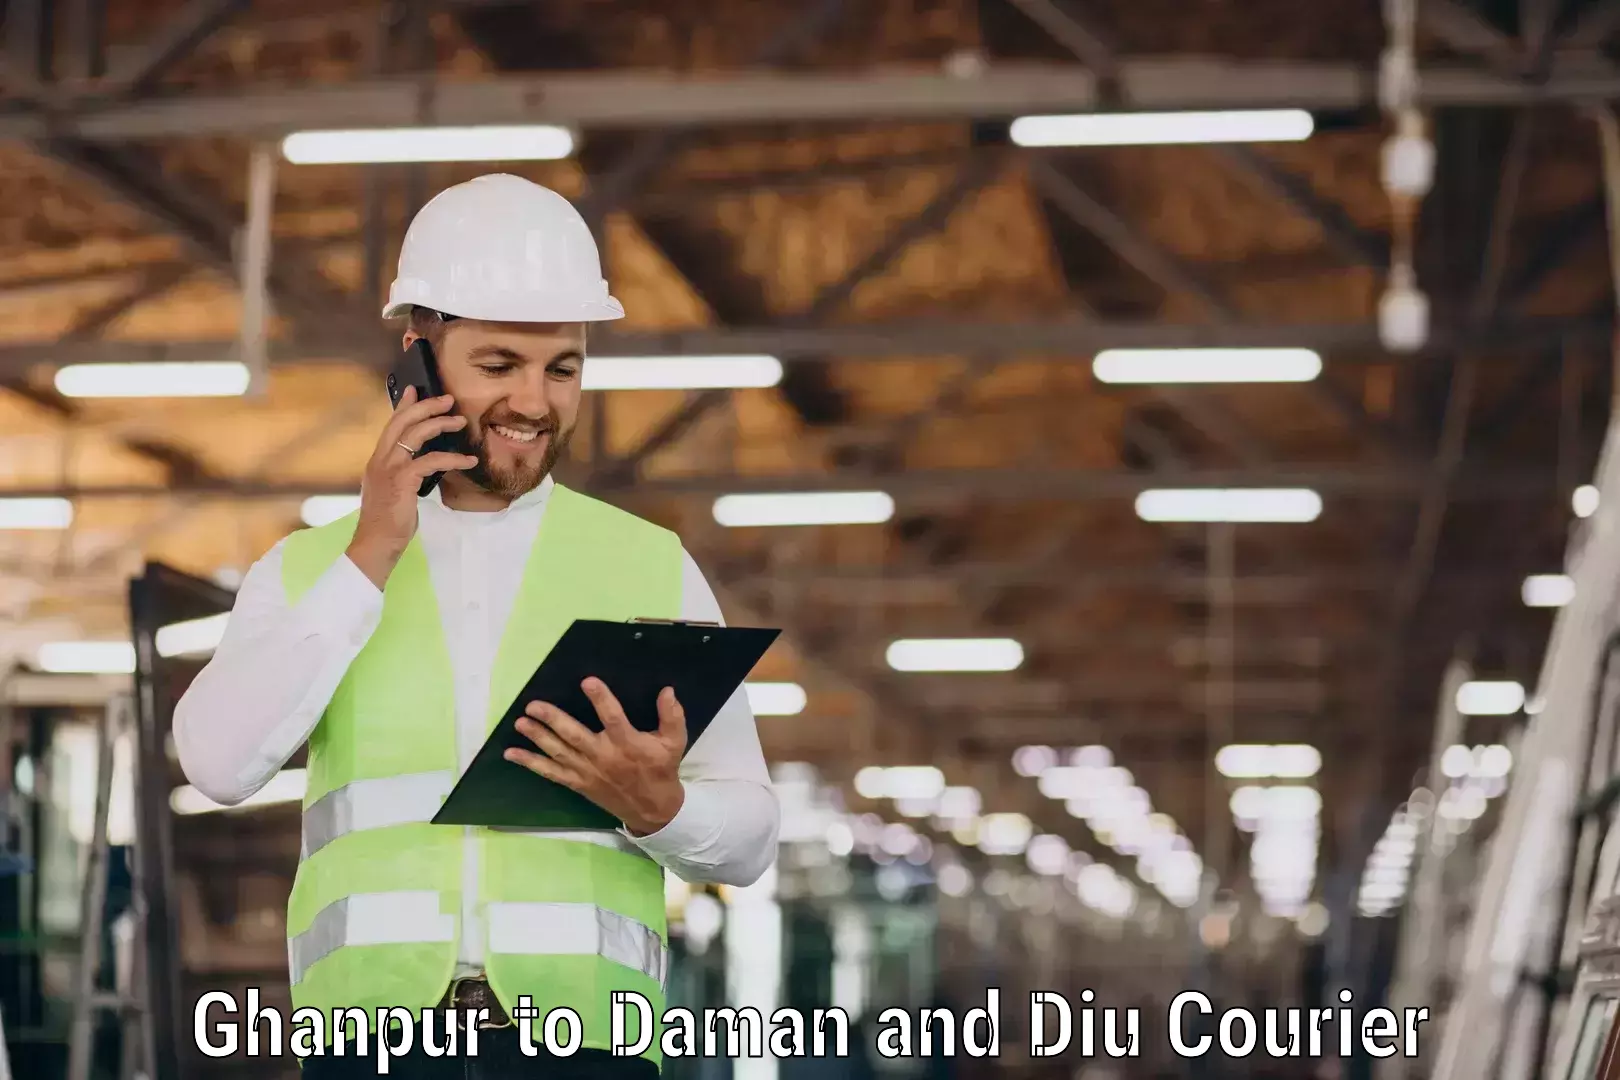 Automated parcel services Ghanpur to Daman and Diu